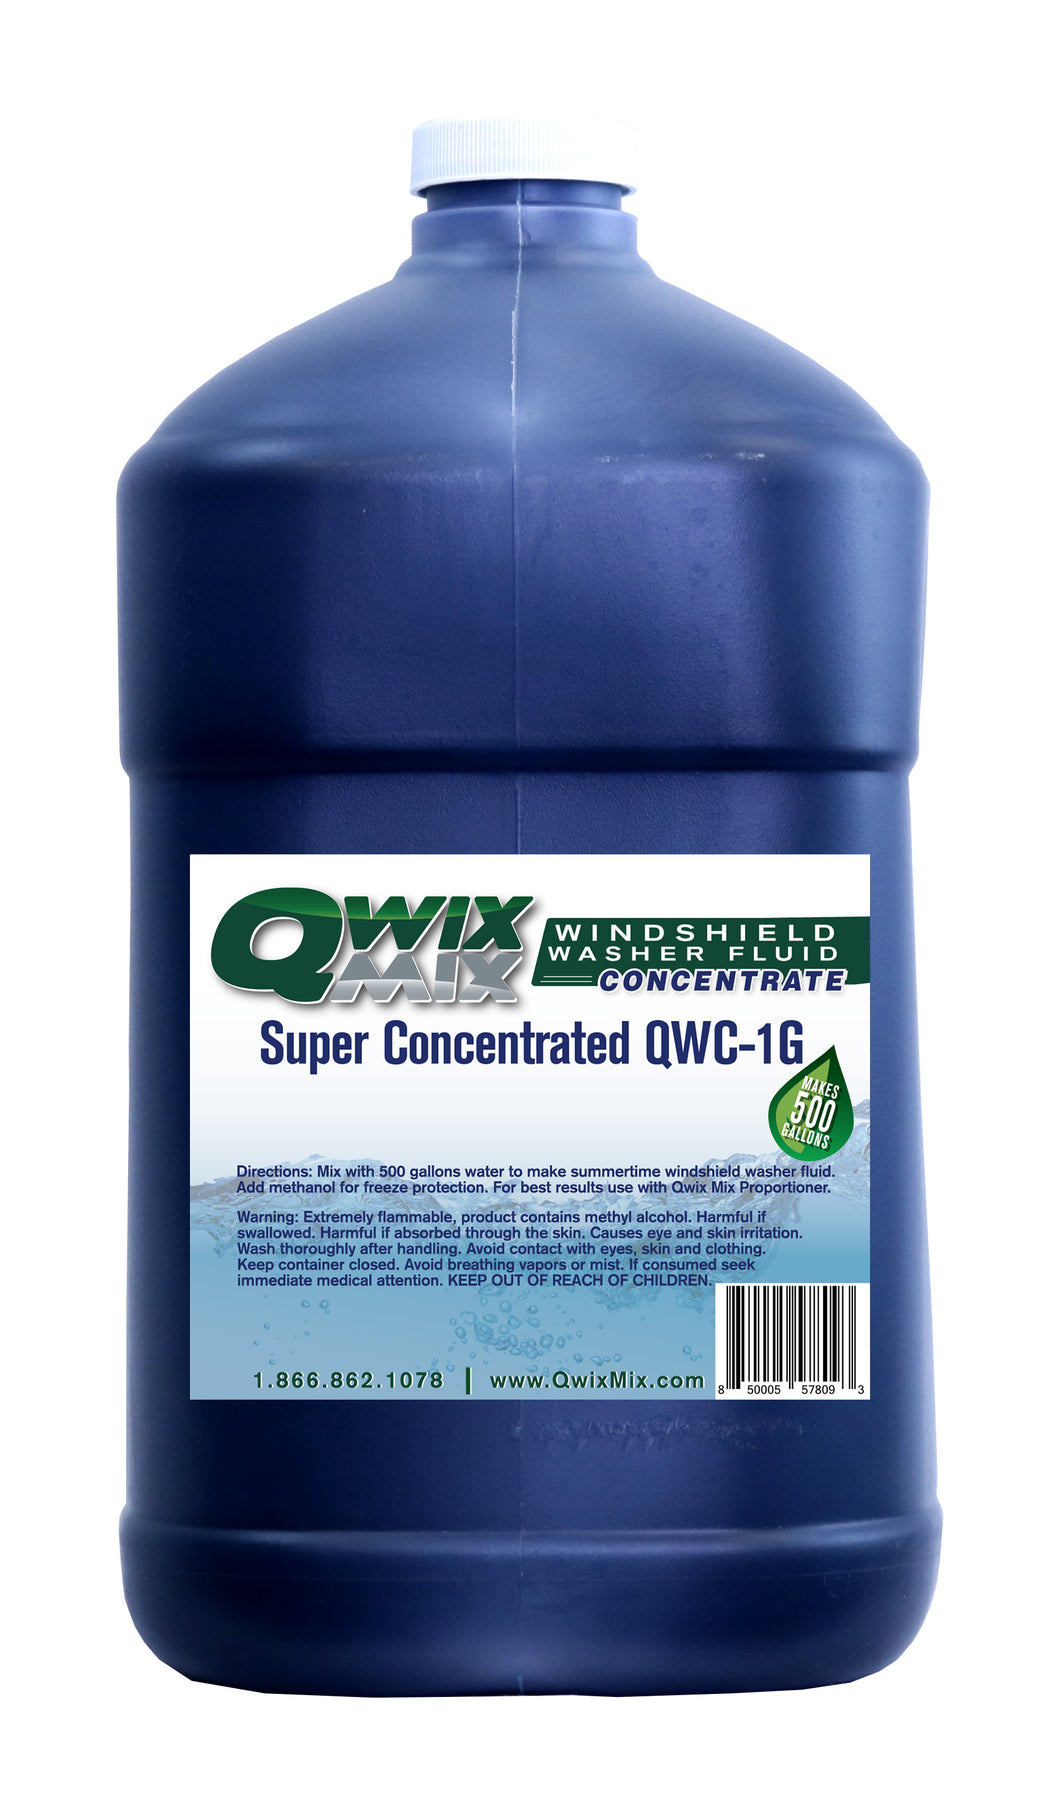 Qwix Mix 1 Gallon Jug of Biodegradable Concentrate For Making Bulk Windshield Washer Fluid. 1 Gallon of Concentrate Makes 500 Gallons 